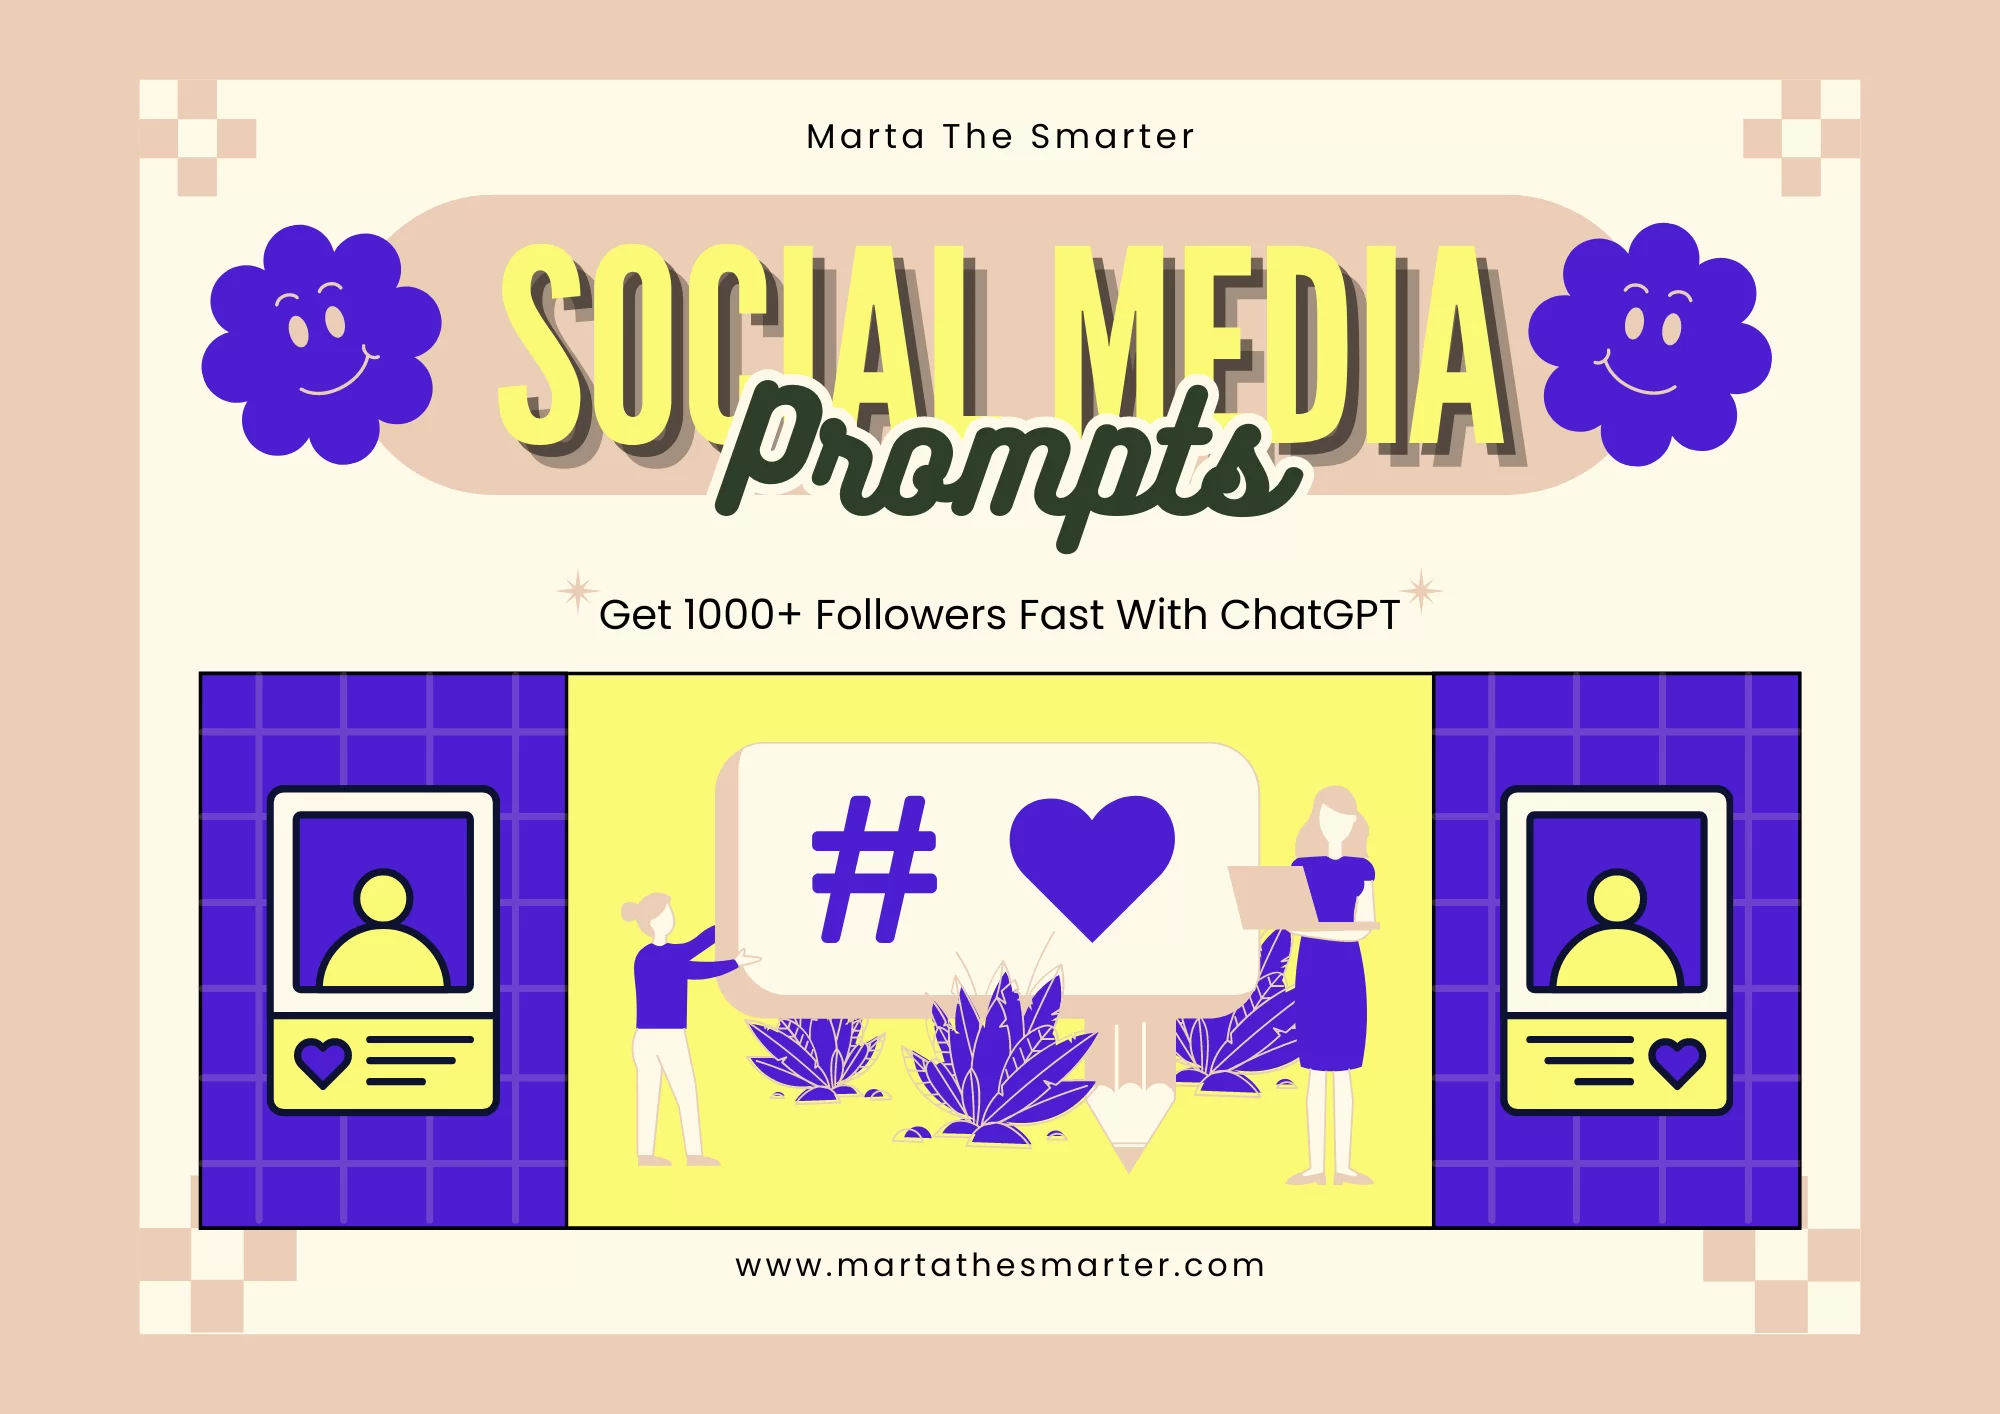 ChatGPT Social Media Prompts - How To Get 1000+ Followers Fast